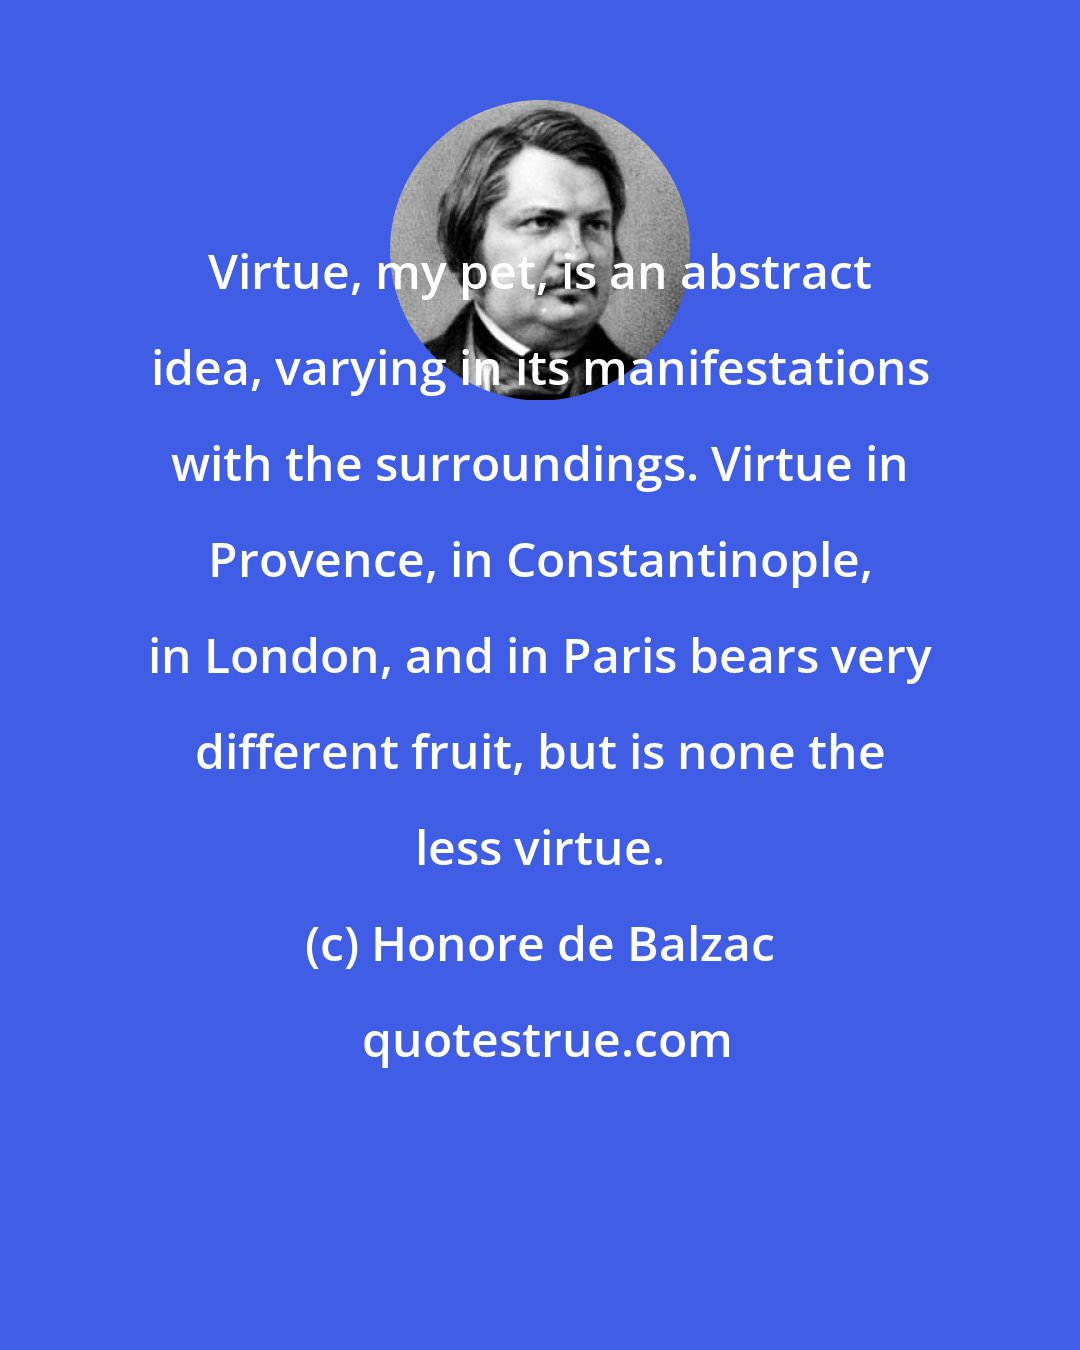 Honore de Balzac: Virtue, my pet, is an abstract idea, varying in its manifestations with the surroundings. Virtue in Provence, in Constantinople, in London, and in Paris bears very different fruit, but is none the less virtue.